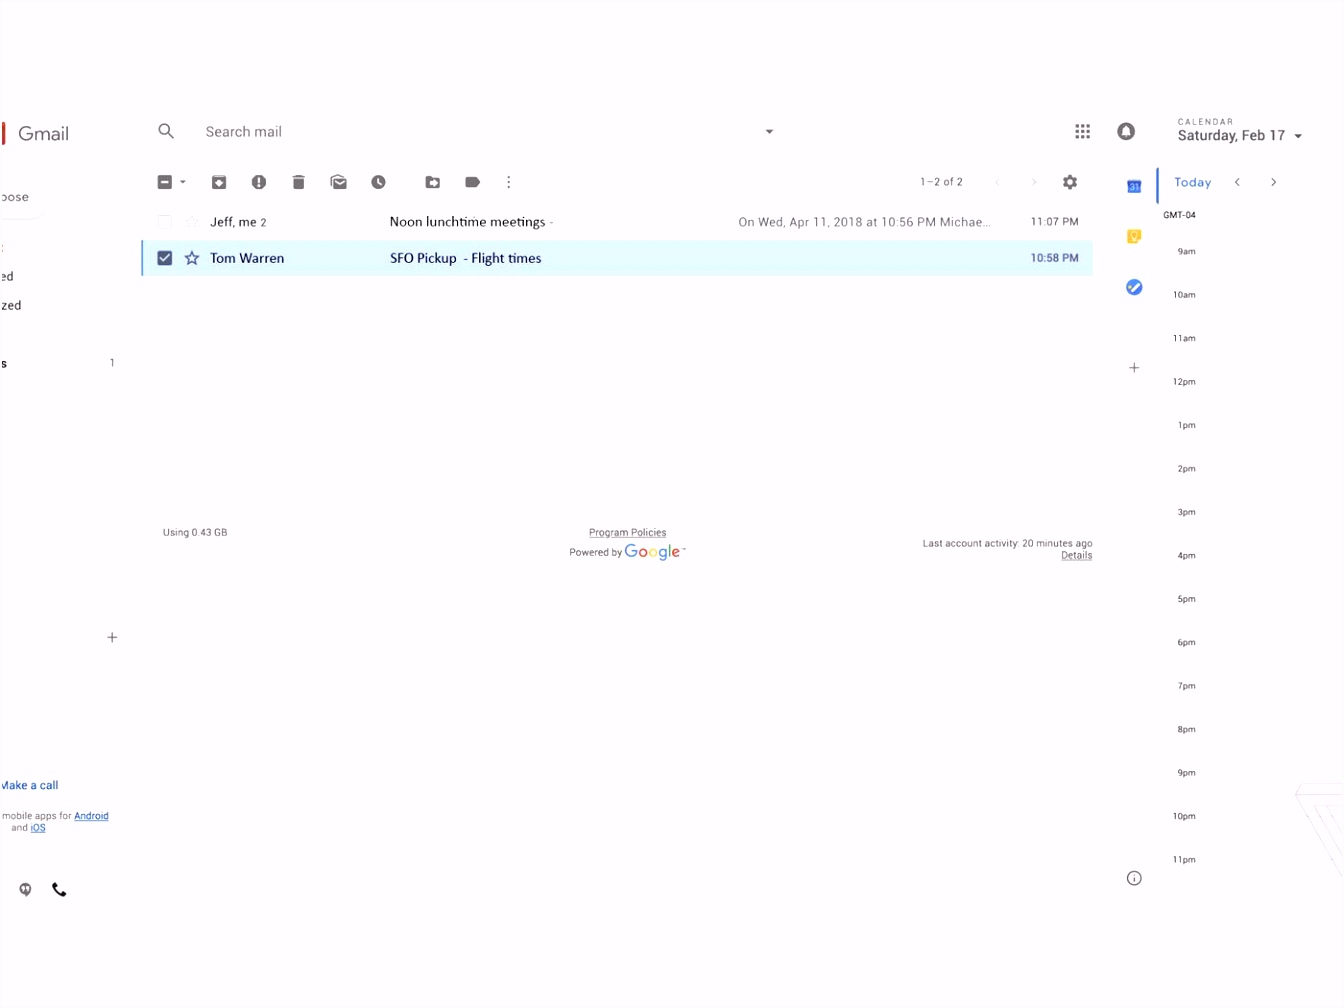 This is the new Gmail design The Verge